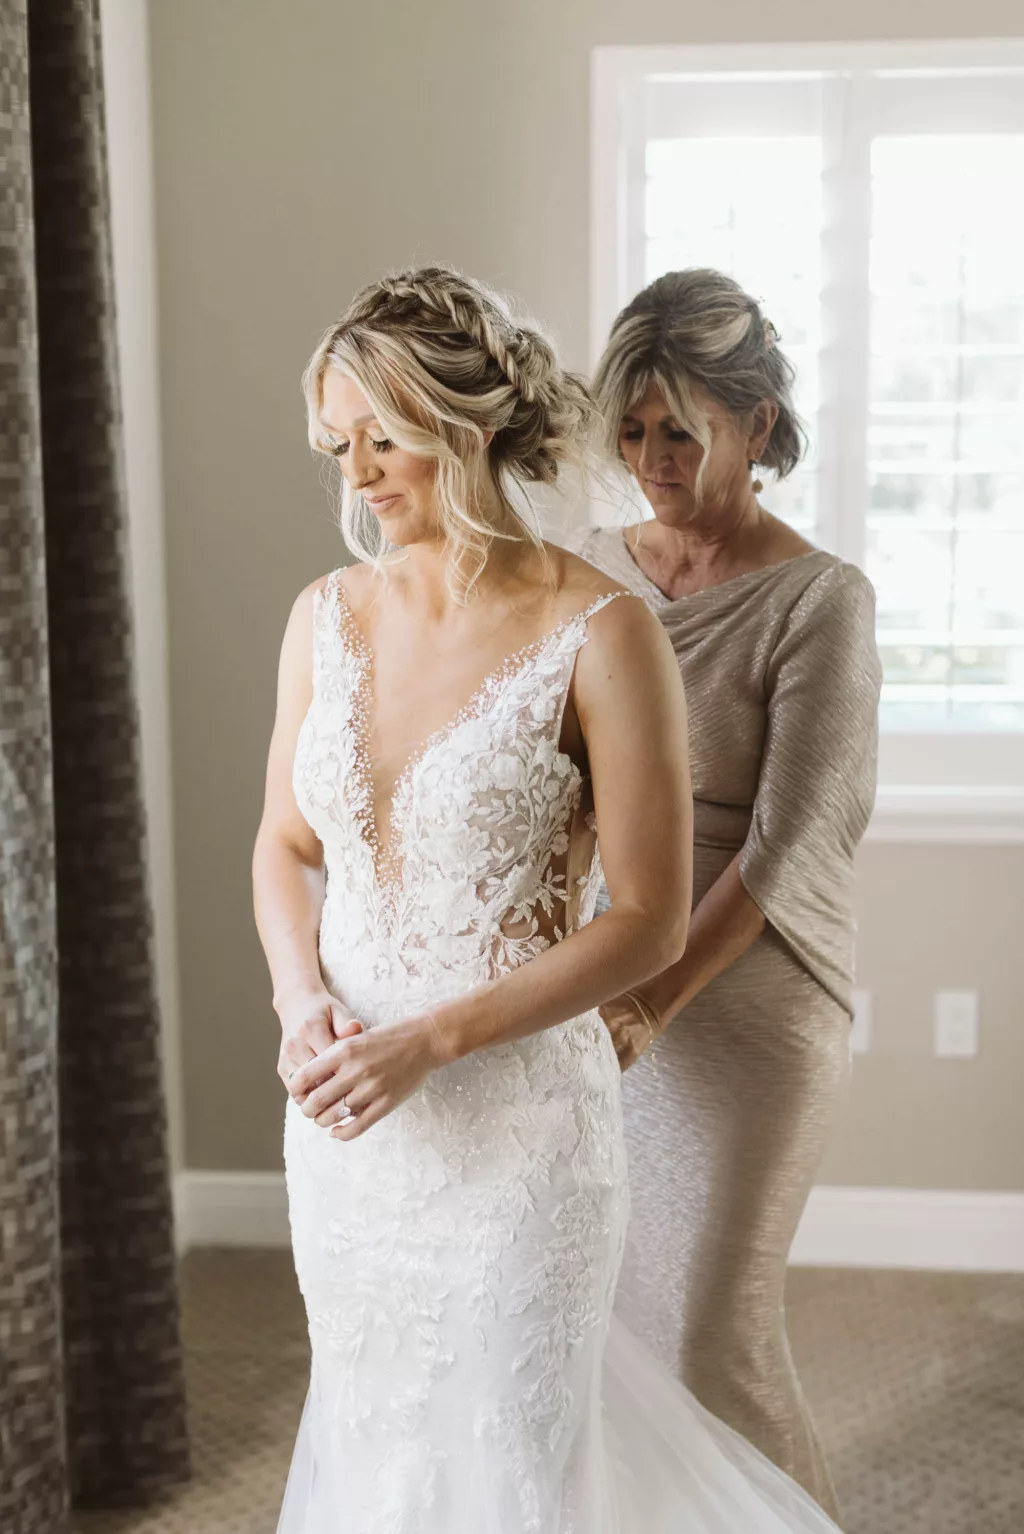 Bride Getting Ready Wedding Portrait | Elegant Fishtail Updo Hair and Makeup Inspiration | White Lace and Tulle Mermaid Wedding Dress Ideas